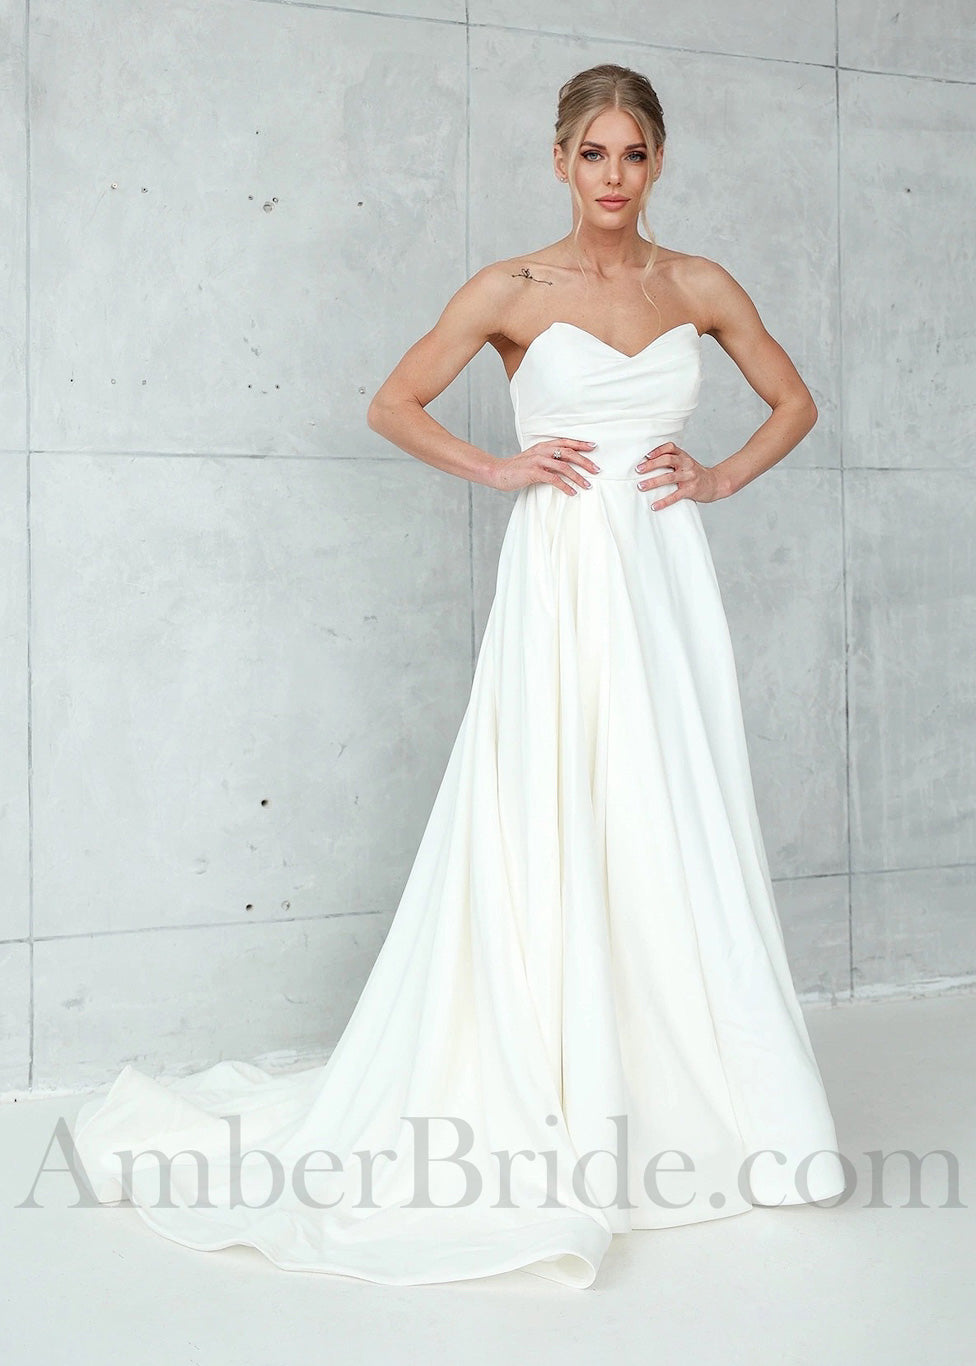 Satin A-Line Wedding Dress with Strapless Sweetheart Neckline and Low Back